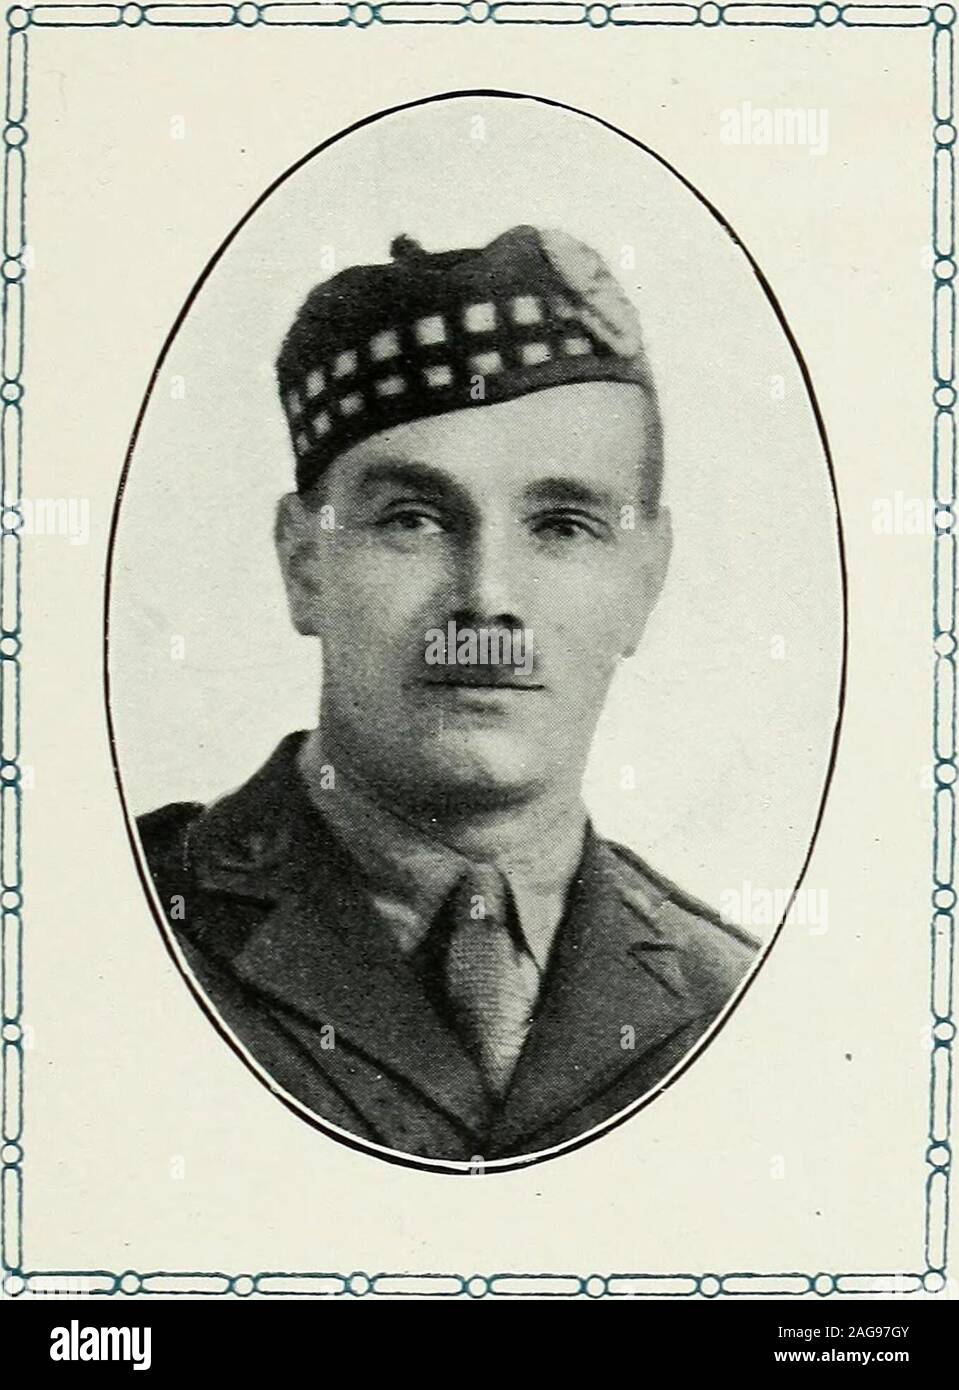 . Record of partners, staff and operatives who participated in the Great War, 1914-1919. 5th Highland Light Infantry. Lieut. Martin, Shipping Department. Joined the2/6th H.L.I, in February, 1915, and was Com-missioned to the 5th H.L.I, on 5th August, 1916.Was transferred to the 18th H.L.I., France, on 1stOctober, 1916, and was wounded on 25th August, 1917. Capt. J. W. Muirhead, Mons Star. 6th Seaforth Highlanders. Capt. Muirhead, Chartering Department. Enlistedin the Glasgow Highlanders on 5th September, 1914,and proceeded to France on 2nd November, 1914.Was transferred to the 6th Seaforths on Stock Photo